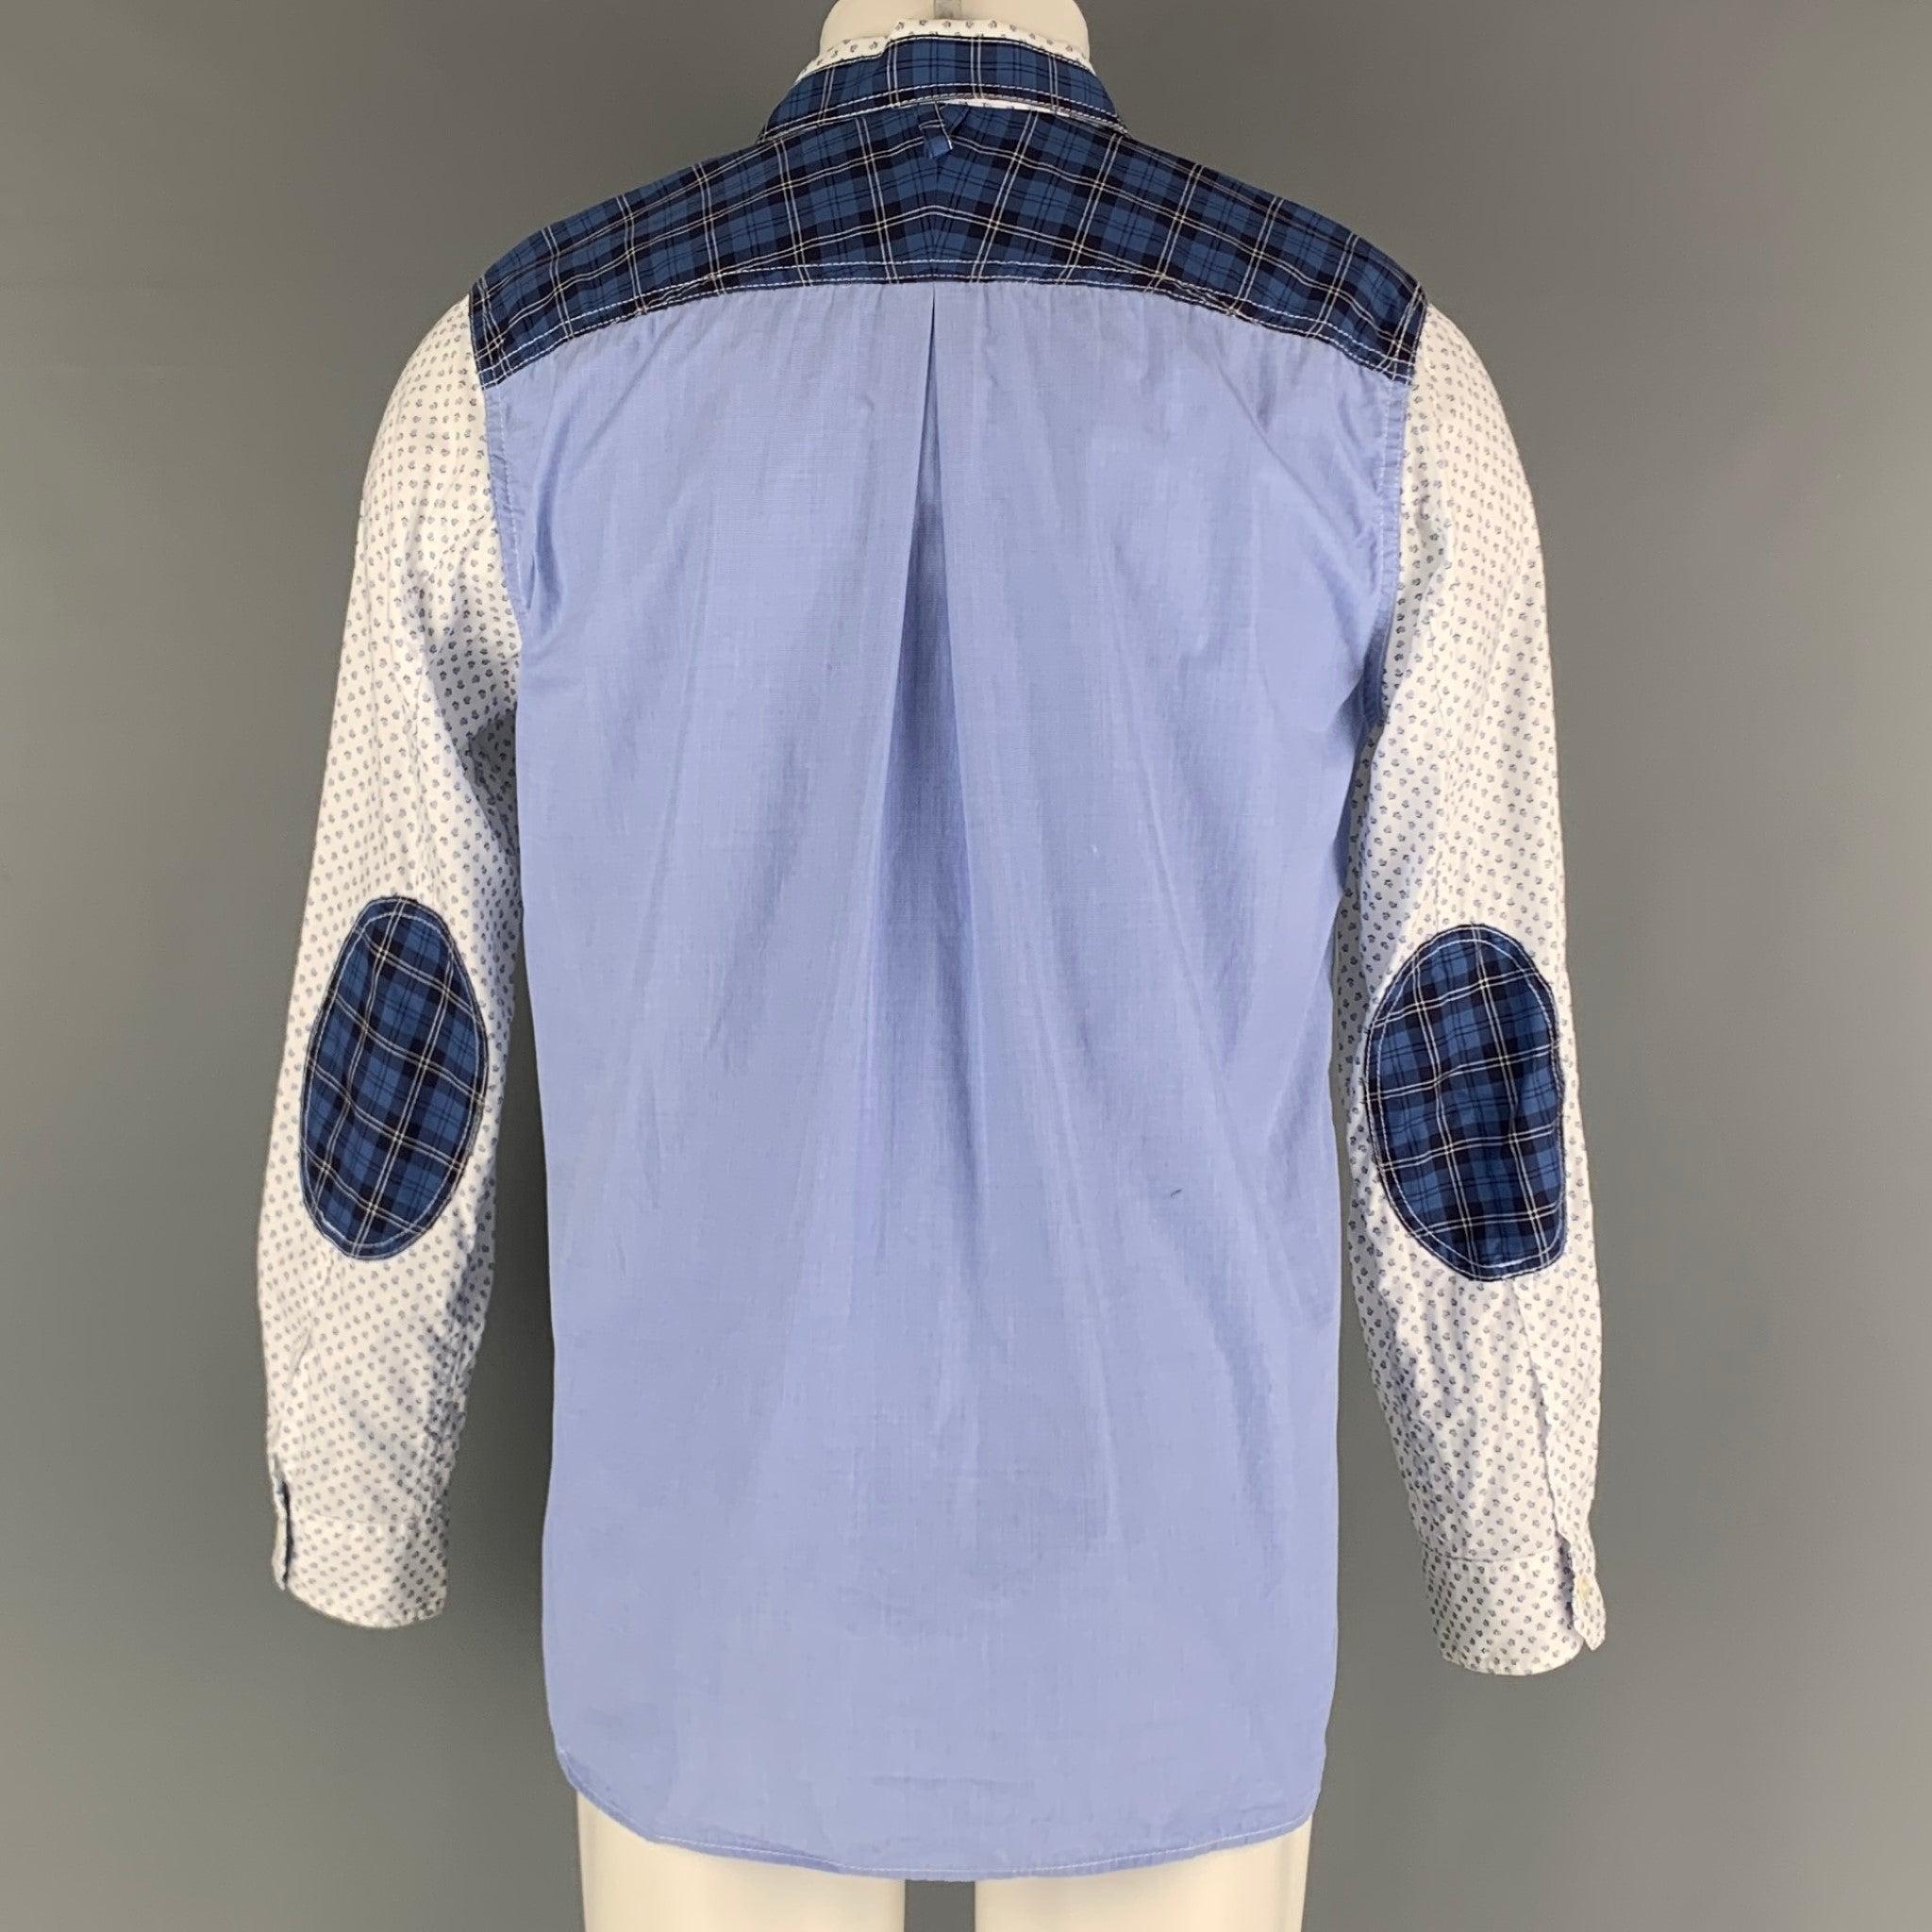 JUNYA WATANABE Size M White Blue Print Cotton Open Collar Long Sleeve Shirt In Good Condition For Sale In San Francisco, CA